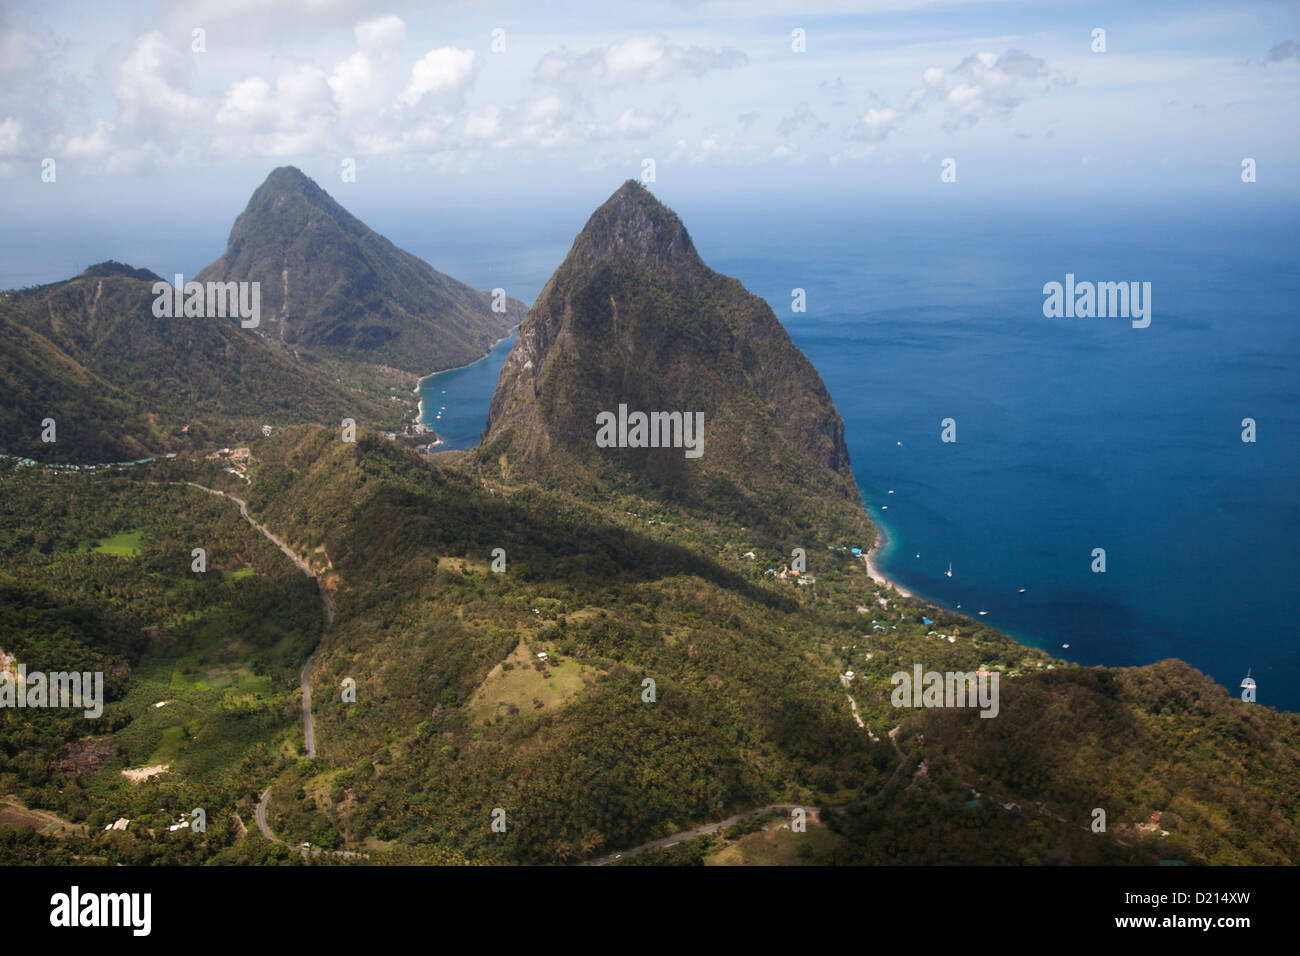 Aerial view of The Pitons, Soufriere, Soufriere, Saint Lucia, Caribbean Stock Photo